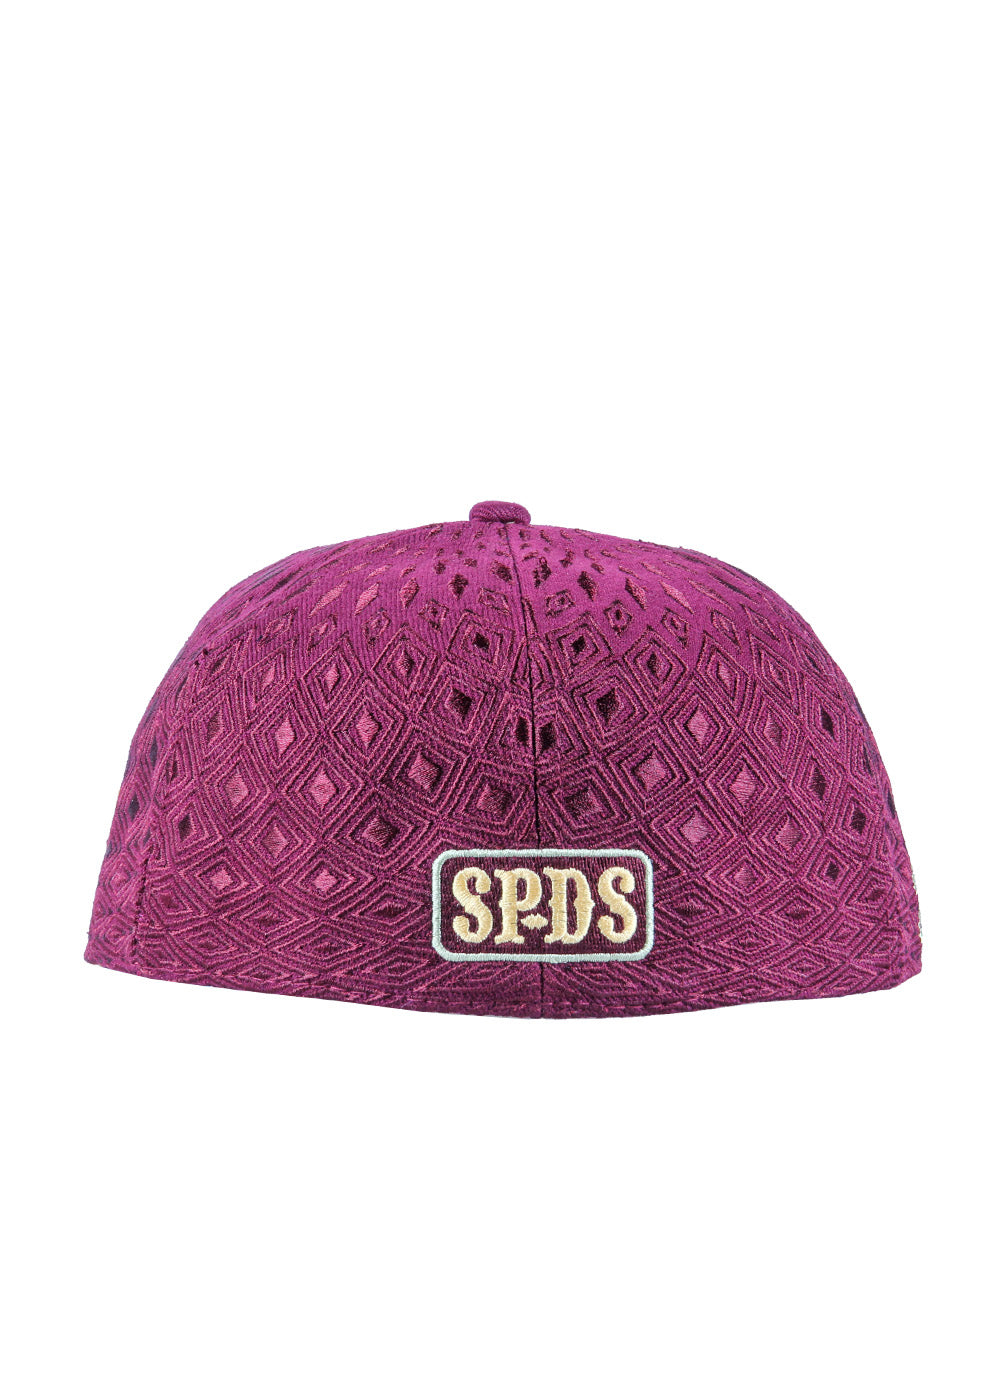 Grassroots San Pedro Del Sol Burgundy Fitted Hat